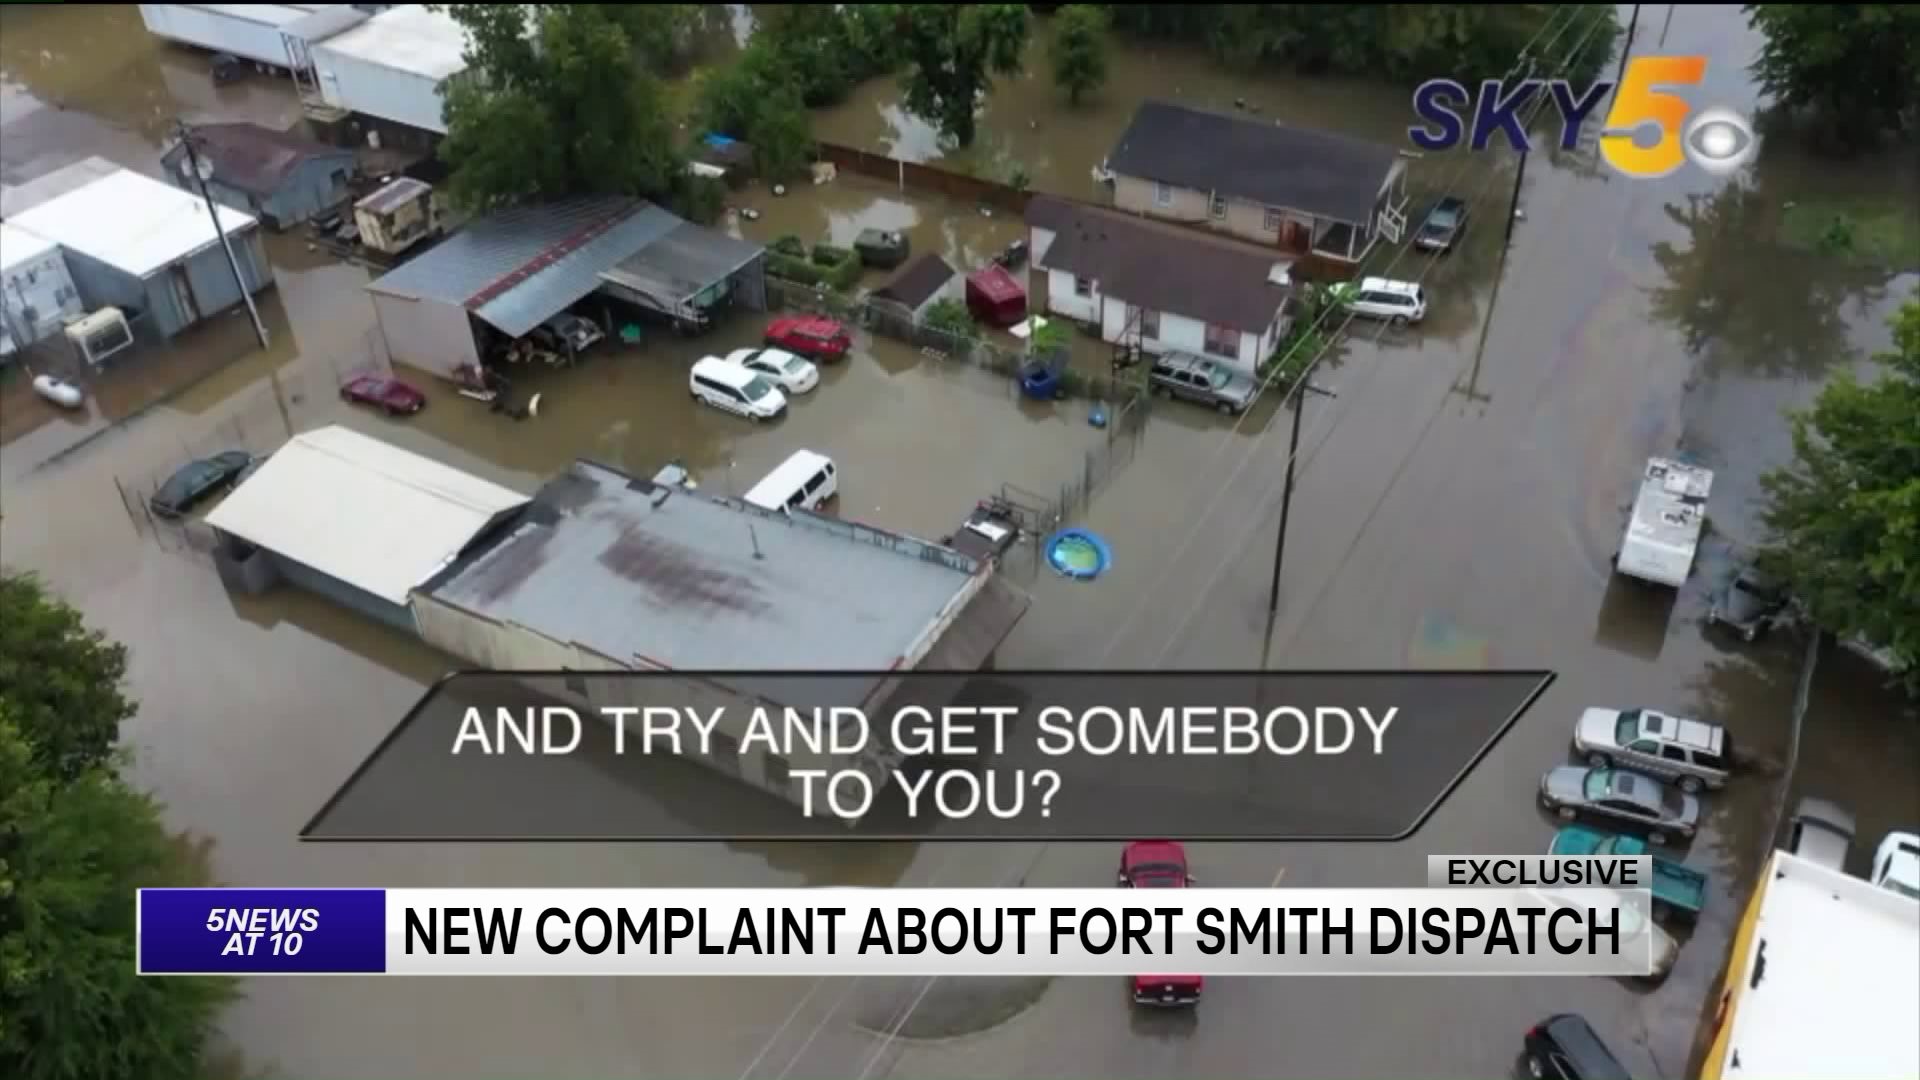 New Complaint About Fort Smith Dispatch